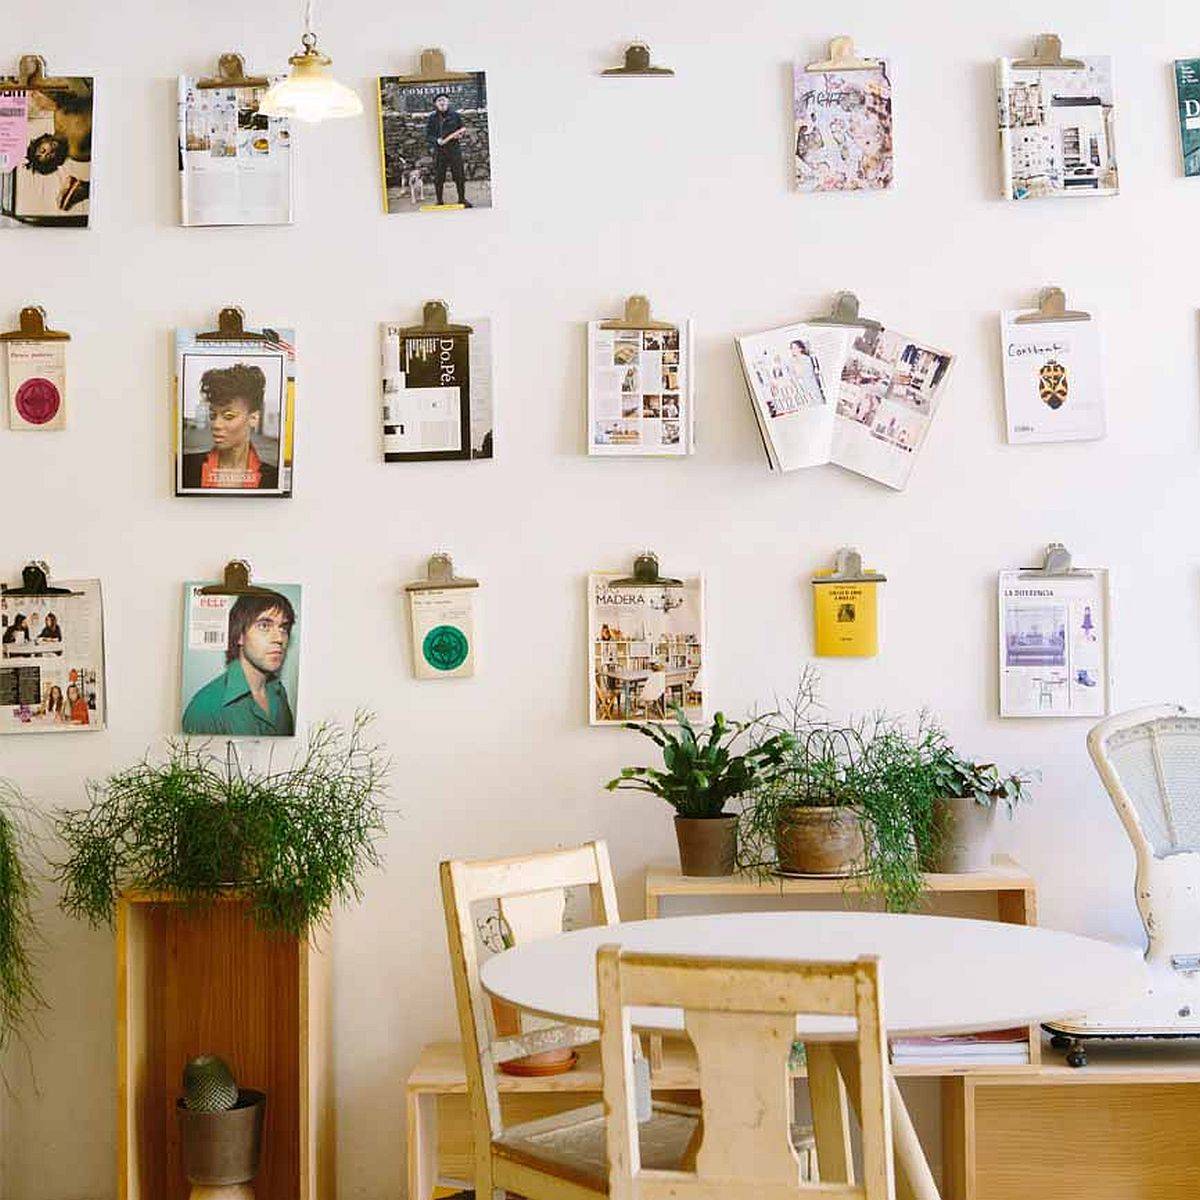 Using clipboards to create a cool and unique gallery wall